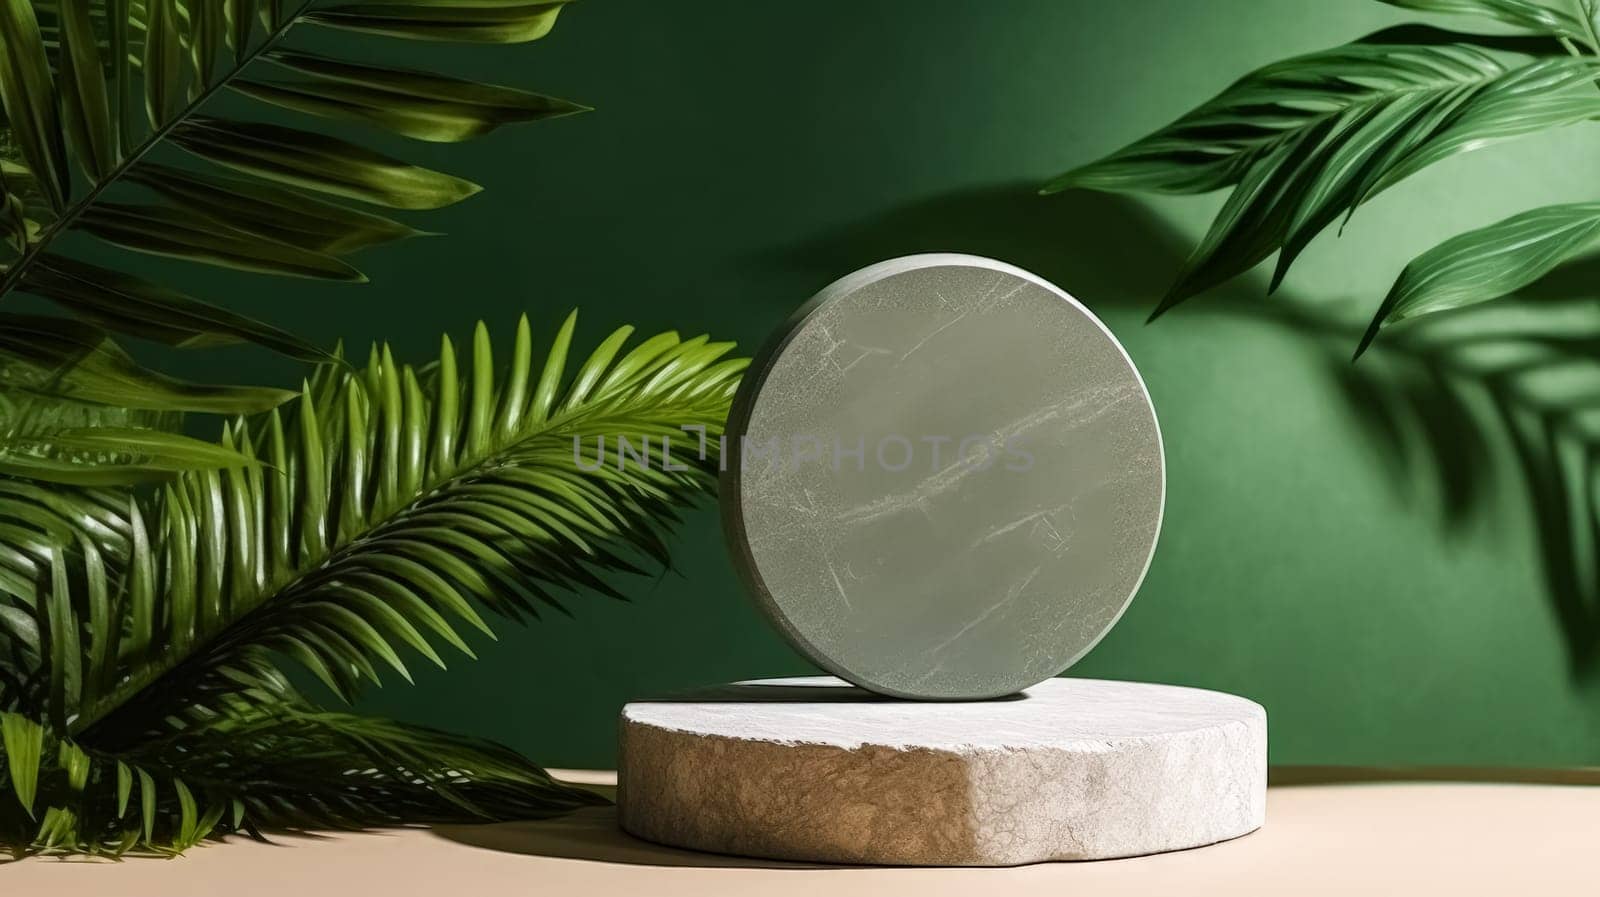 Concrete podium for cosmetics adorned with lush tropical leaves on a vibrant green background. Elevate your product presentation with this stylish and tropical design.